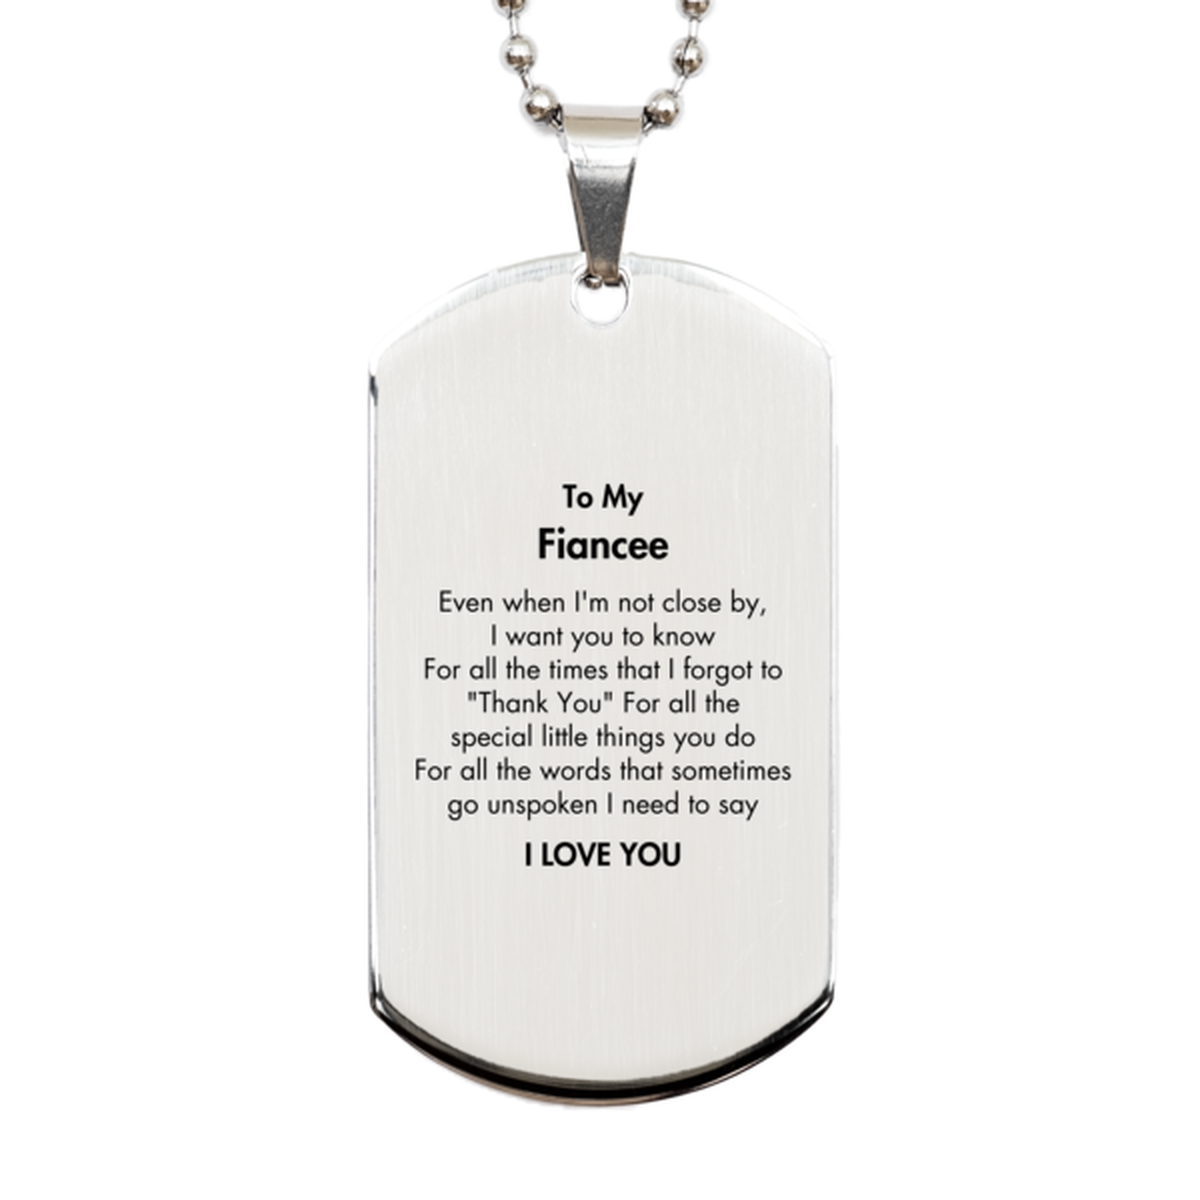 Thank You Gifts for Fiancee, Keepsake Silver Dog Tag Gifts for Fiancee Birthday Mother's day Father's Day Fiancee For all the words That sometimes go unspoken I need to say I LOVE YOU